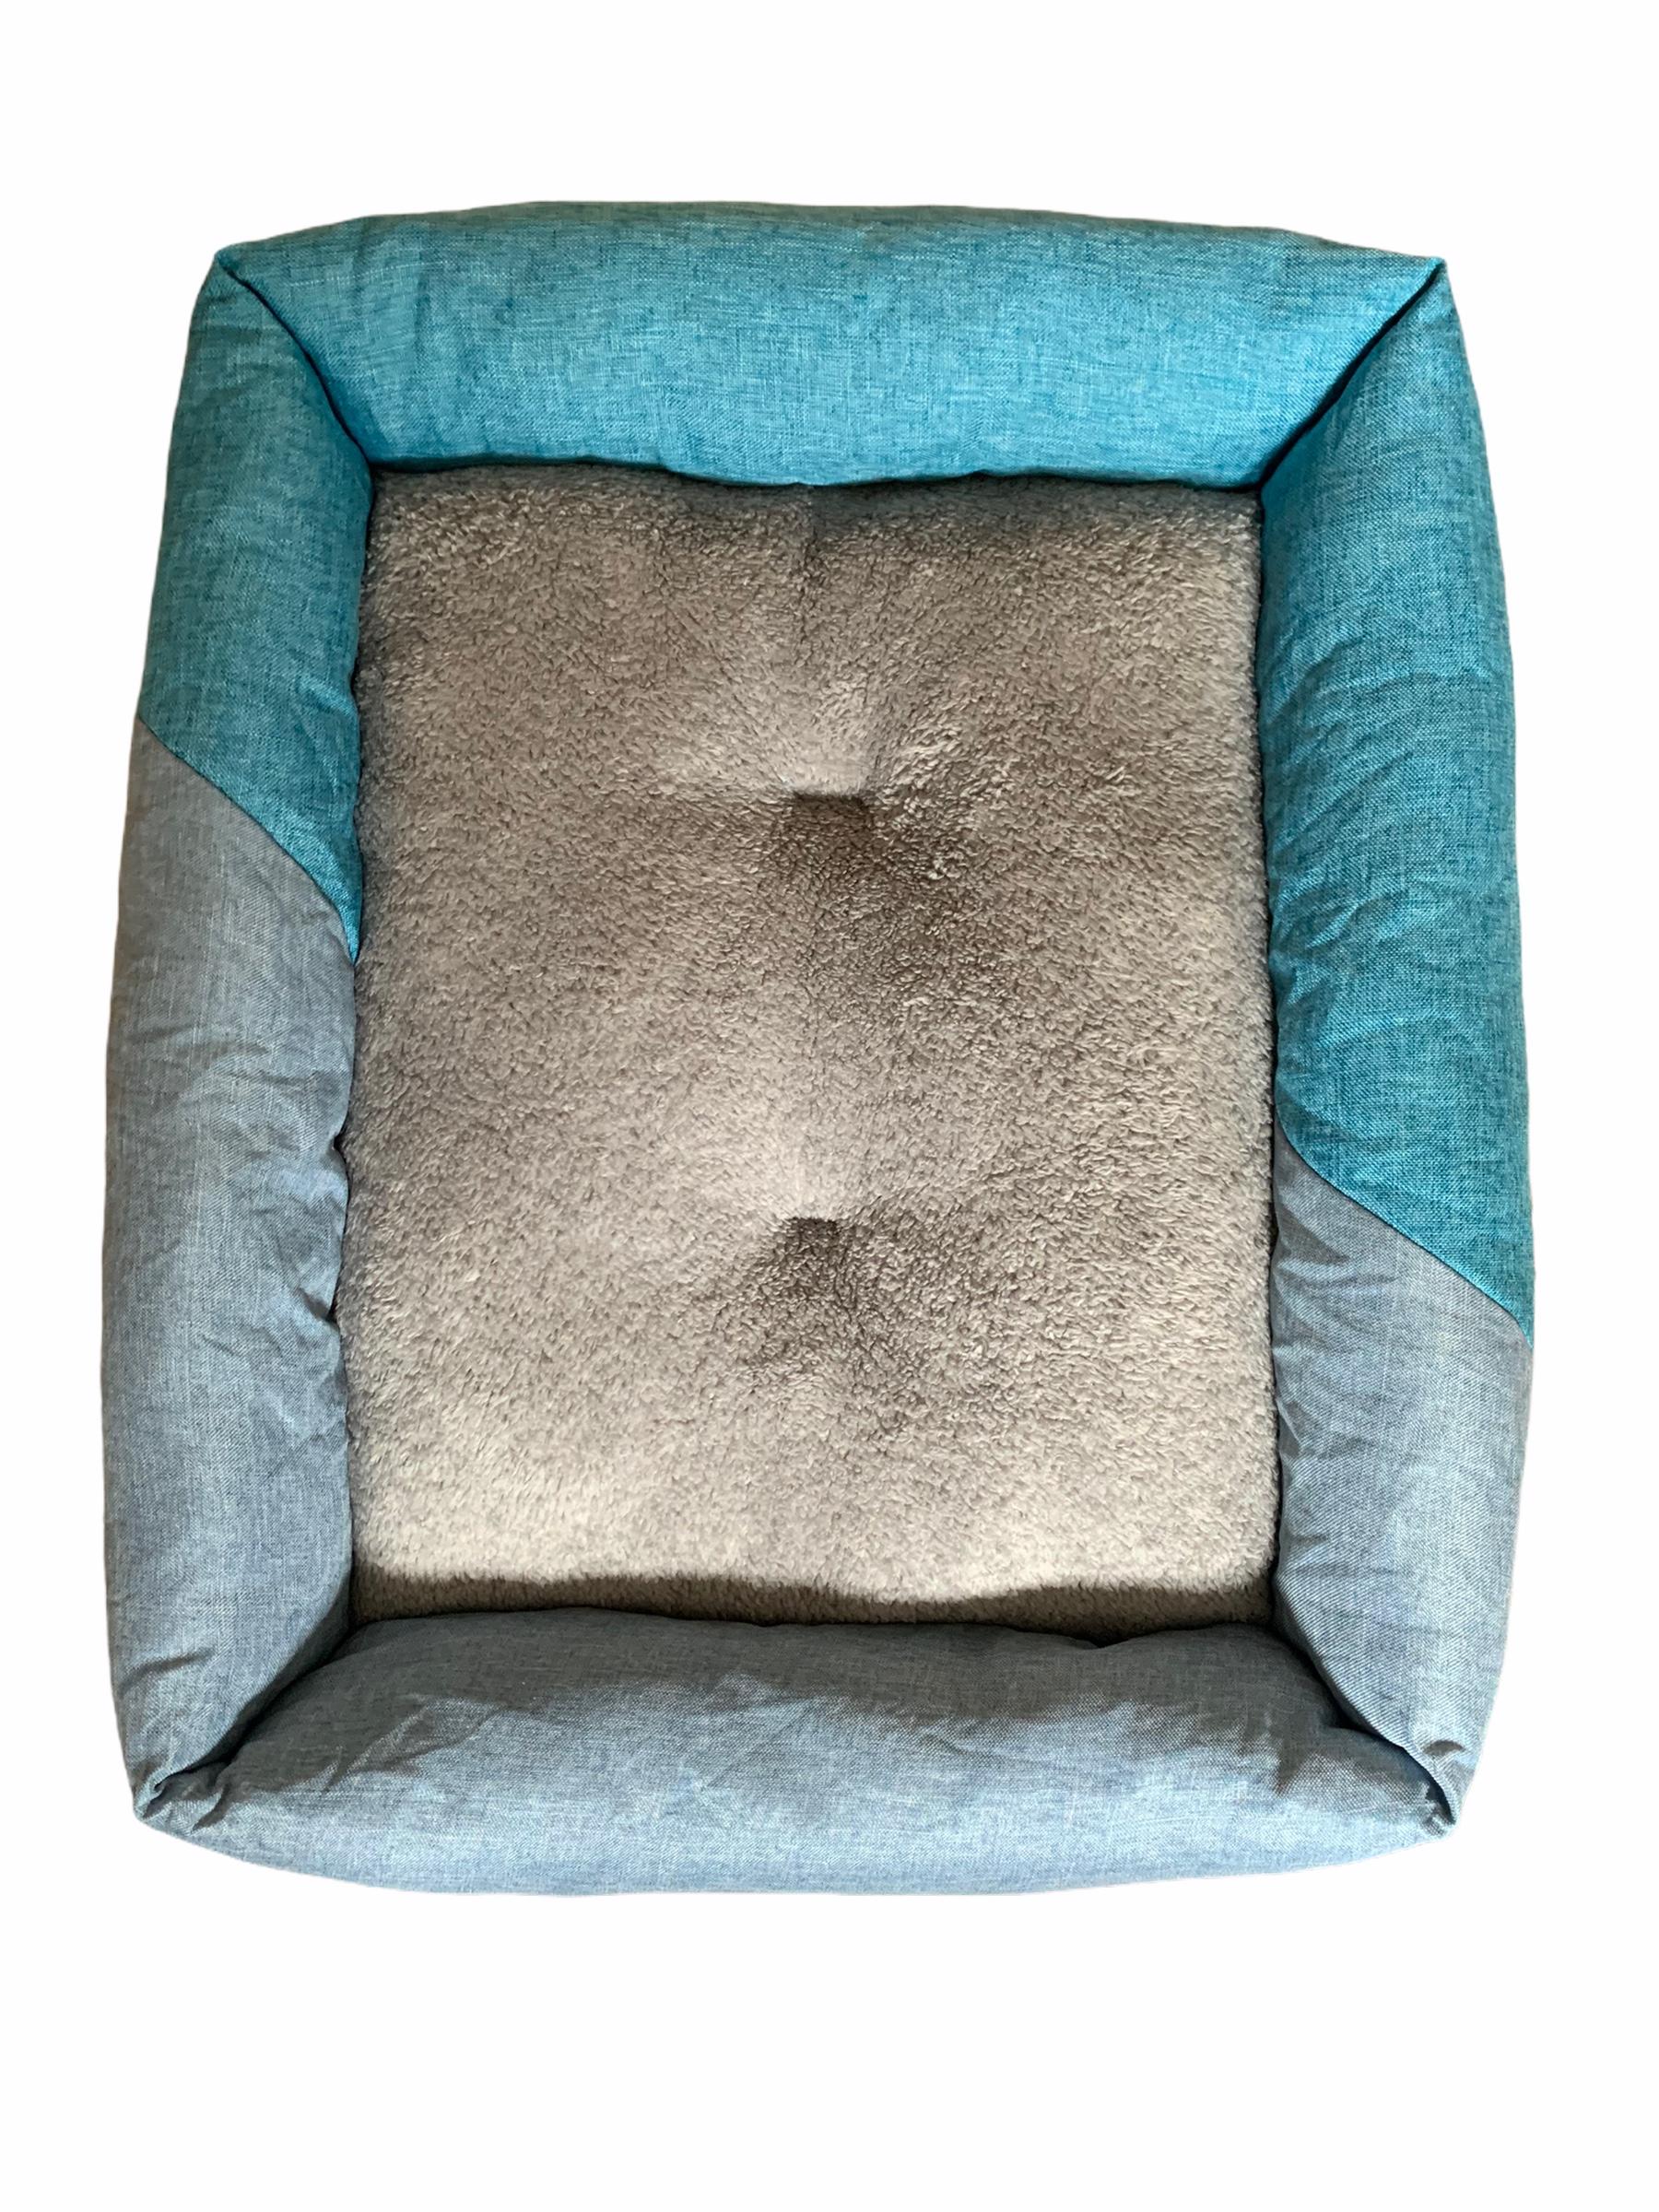 Anti-anxiety puppy bed